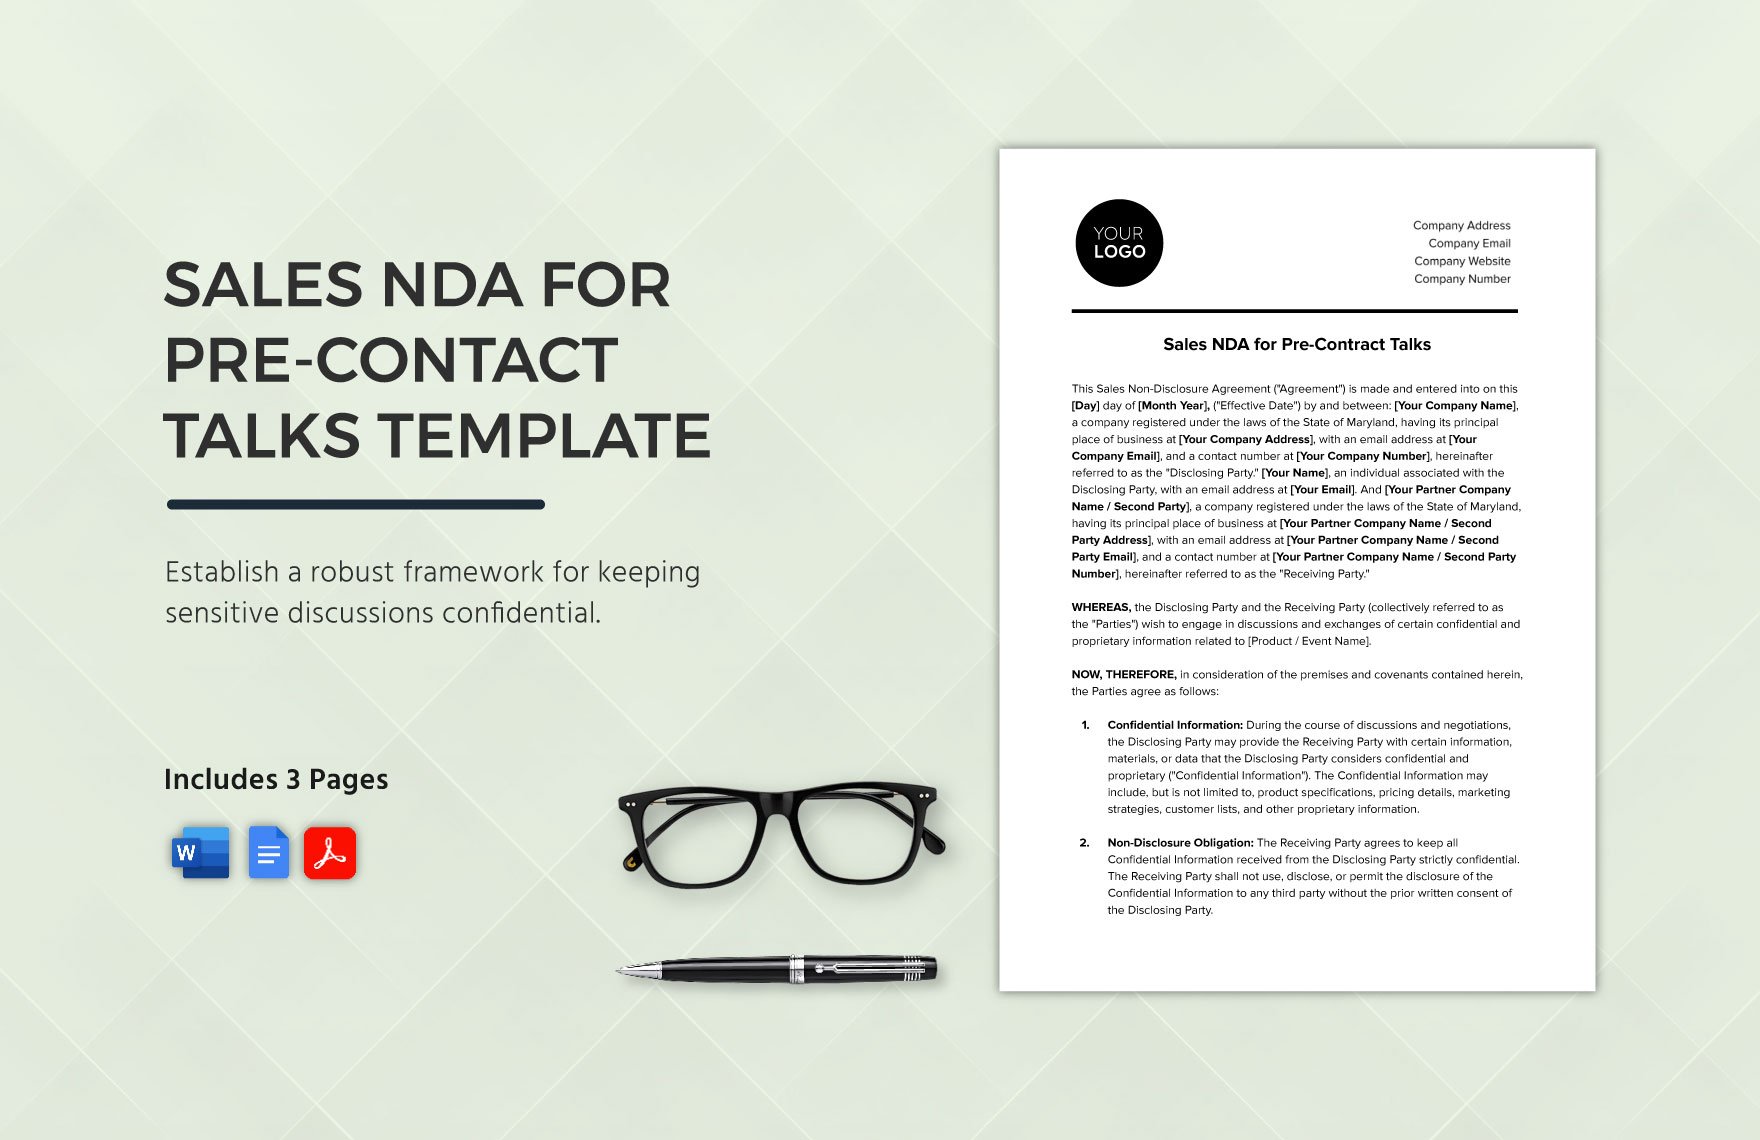 Sales NDA for Pre-Contract Talks Template in Word, Google Docs, PDF